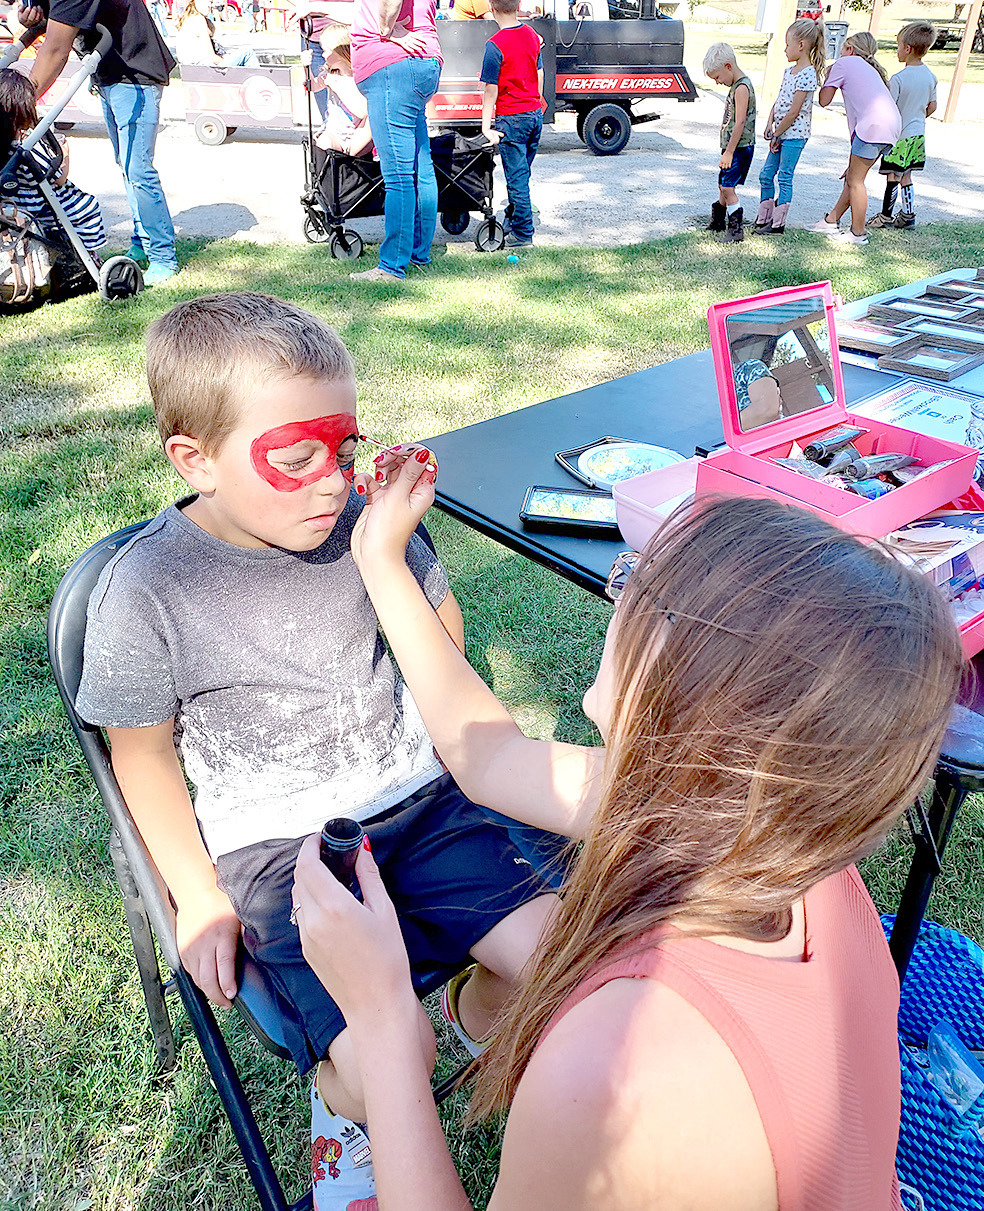 THE FACE PAINTING at the Stockton Pumpkin Patch was Mne of the many popular booths at the event. Getting his Spiderman mask on Ryker States.